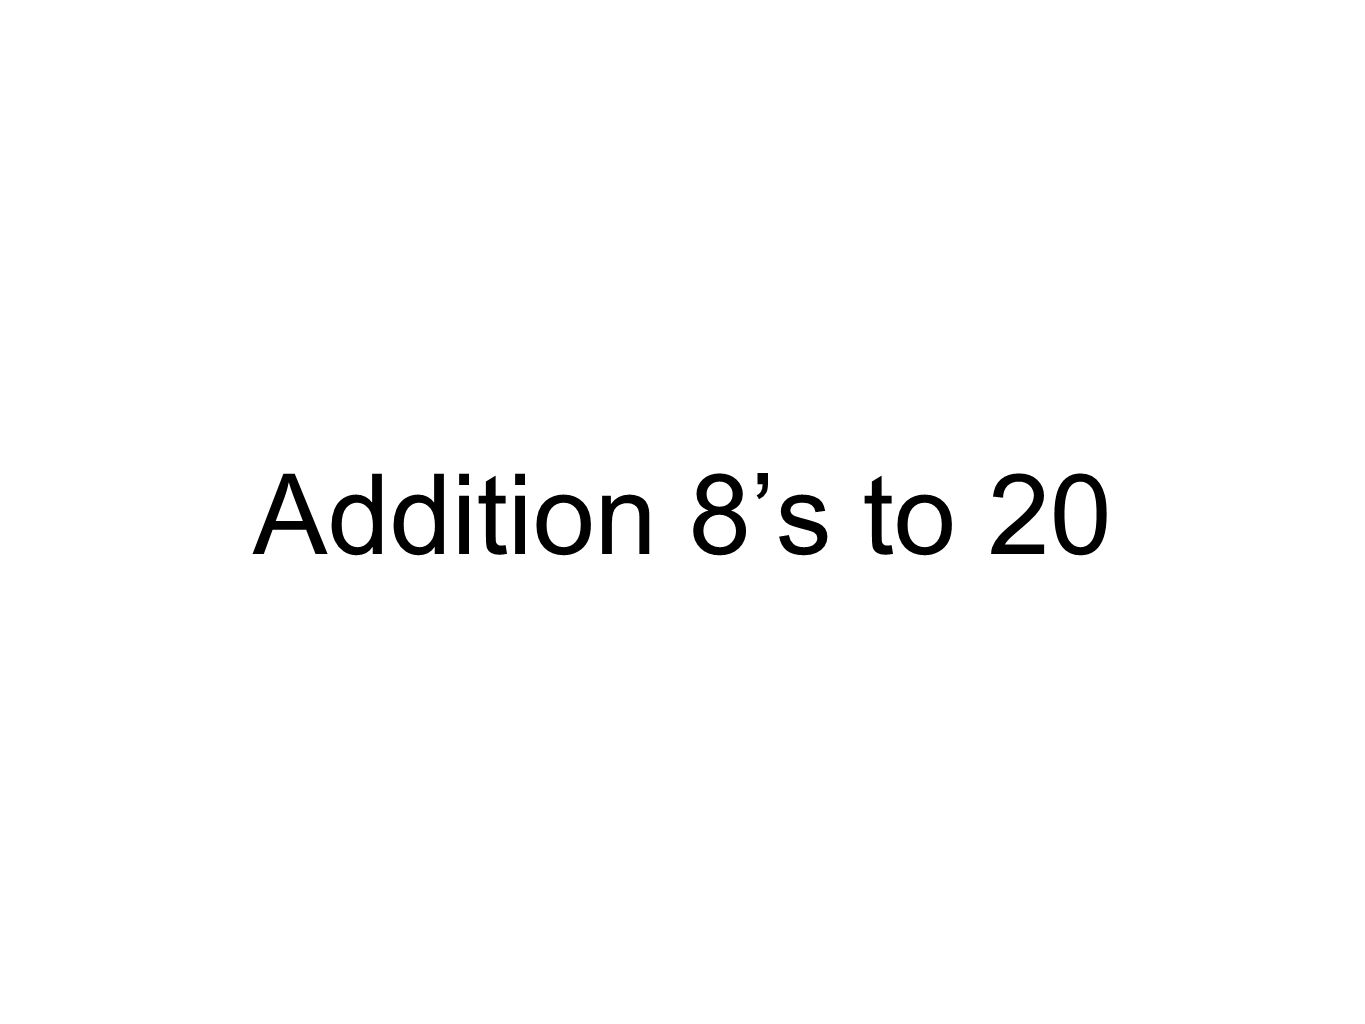 Addition 8’s to 20